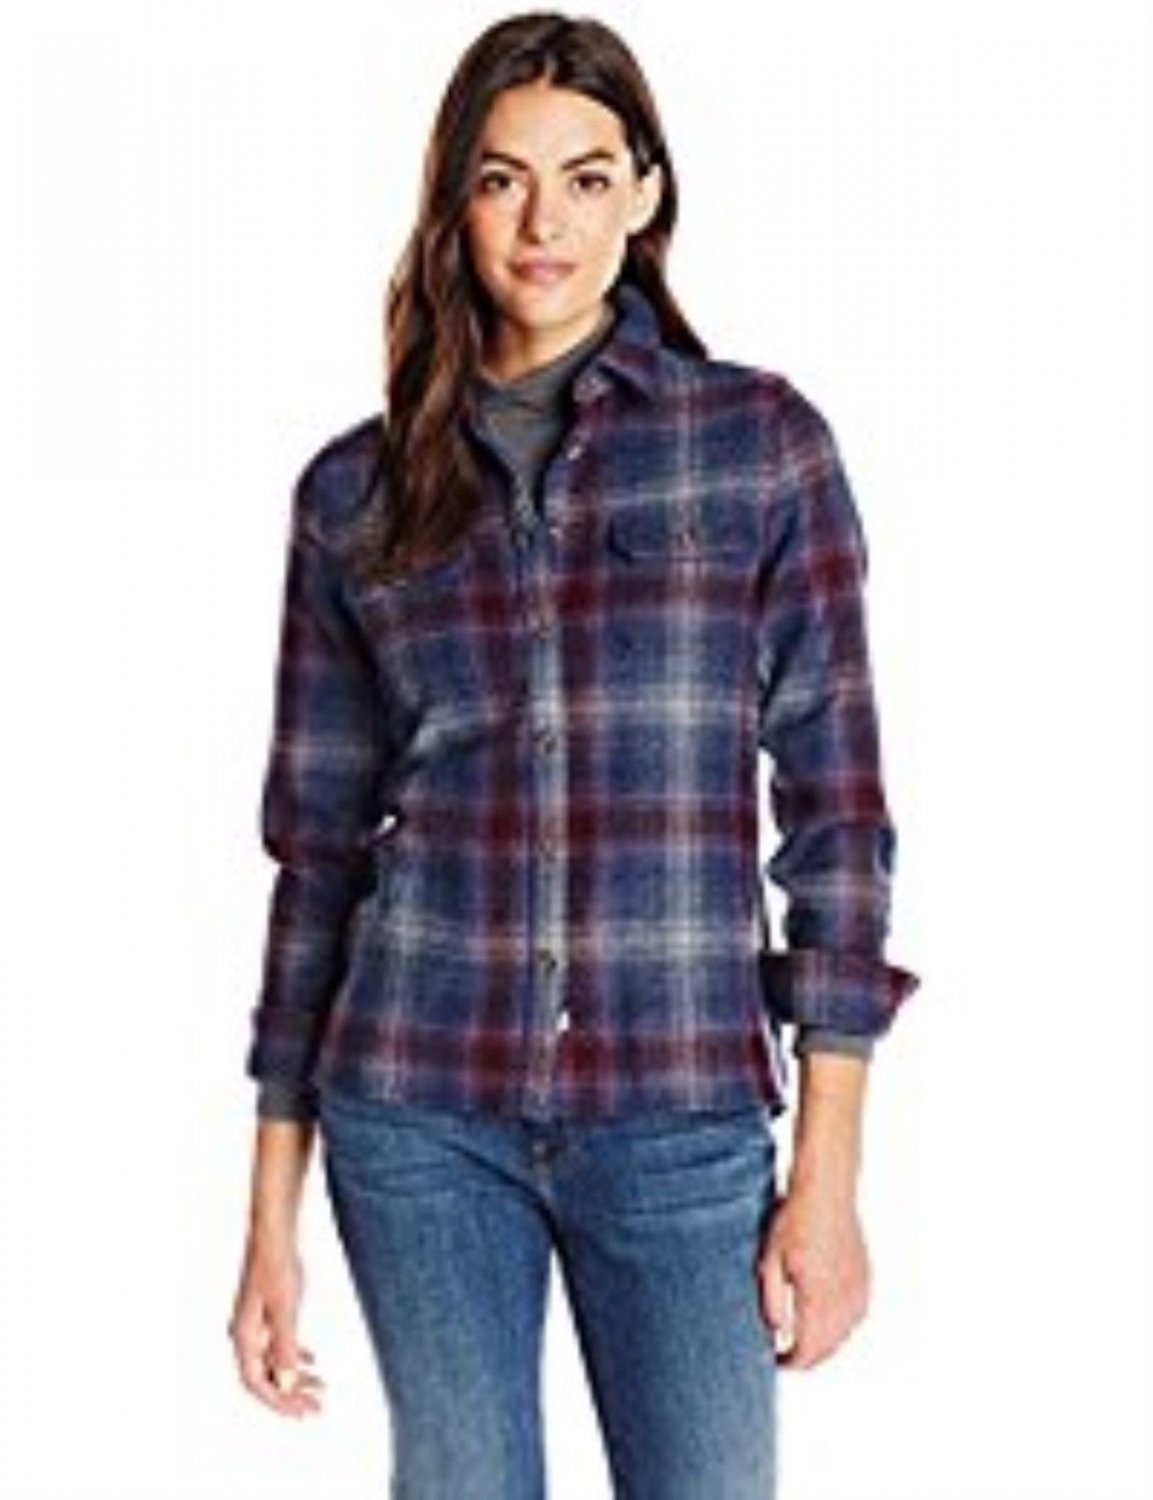 Ladies WOOLRICH Shirt Size M - 100% Wool Ombre Plaid $177 Value - NWT